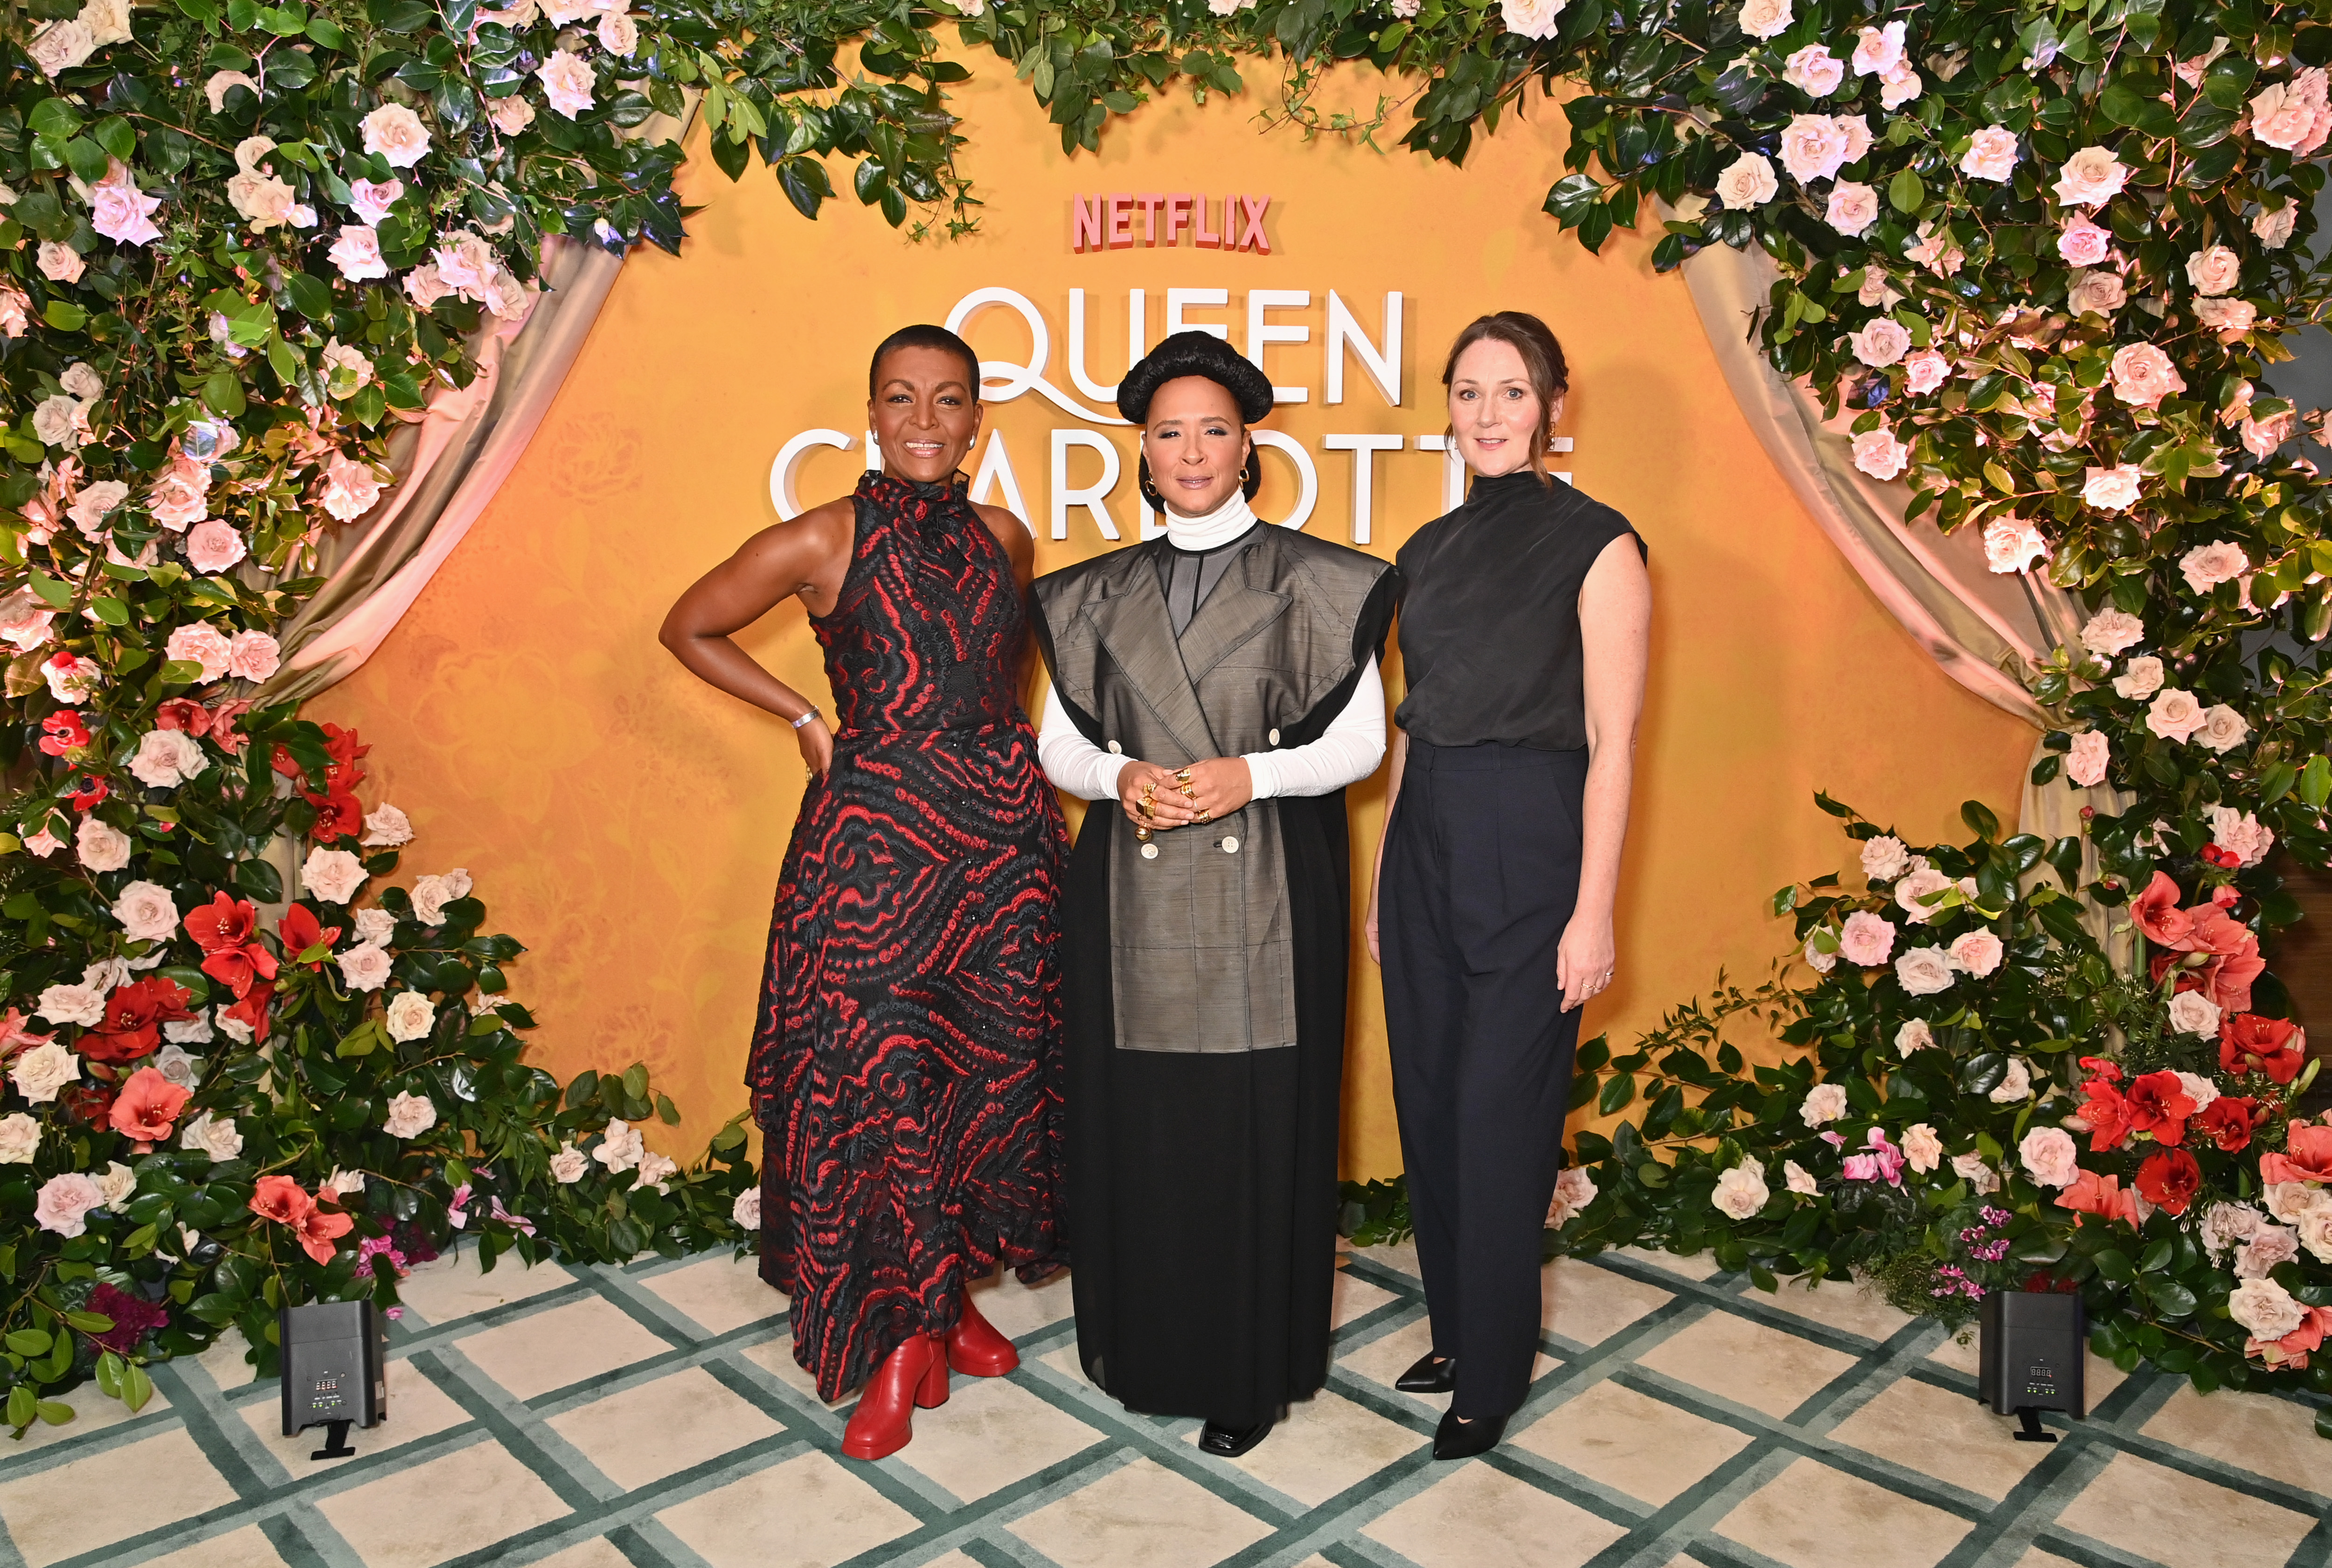 (L to R) Adjoa Andoh, Golda Rosheuvel and Ruth Gemmell attend a photocall celebrating the Valentine's Day Global Teaser Trailer Reveal for "Queen Charlotte: A Bridgerton Story" at Claridge's Hotel, on February 14, 2023, in London, England.  | Source: Getty Images